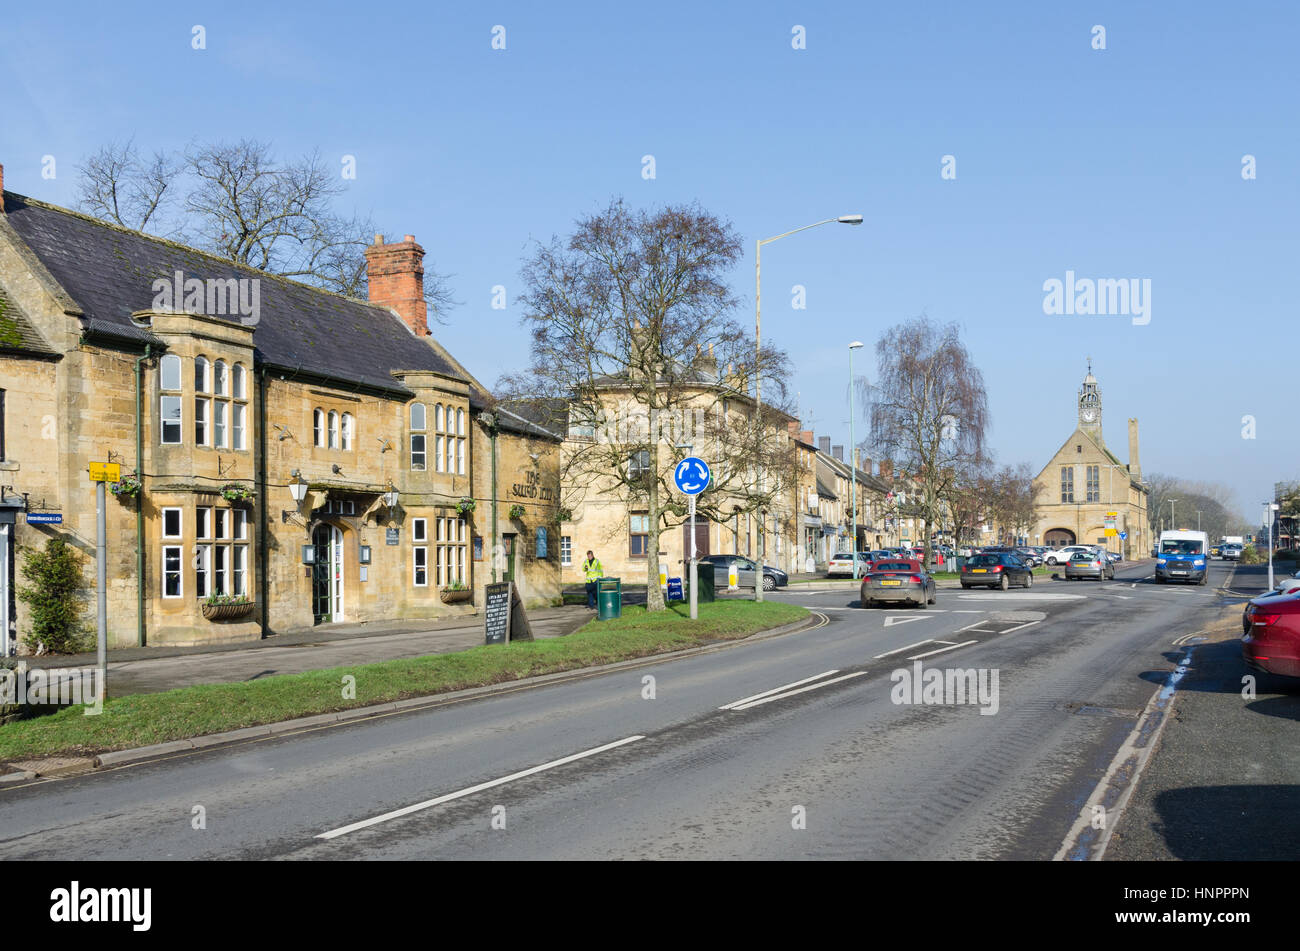 Pretty Cotswold stone buildings in the Gloucestershire town of Moreton-in-Marsh in the Cotswolds Stock Photo